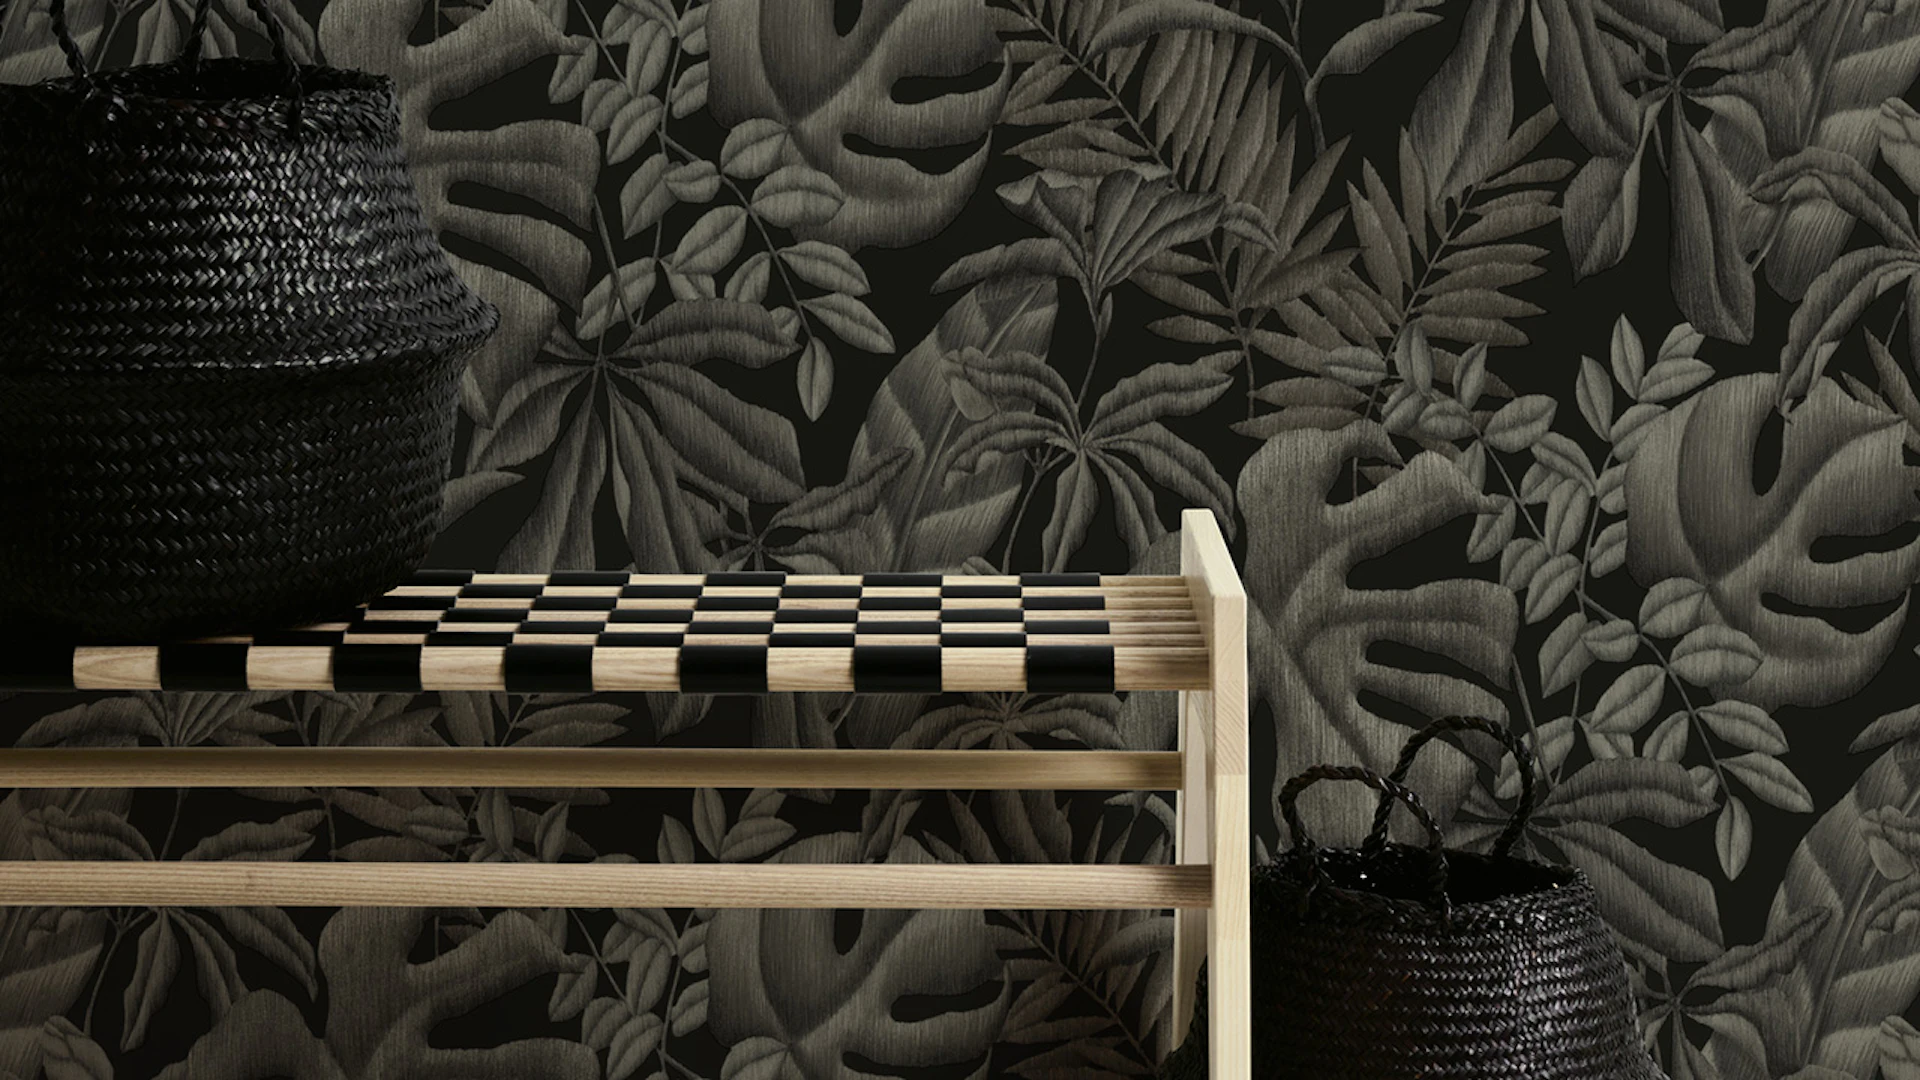 Vinyl wallpaper Greenery A.S. Création country style palm leaves grey black 332